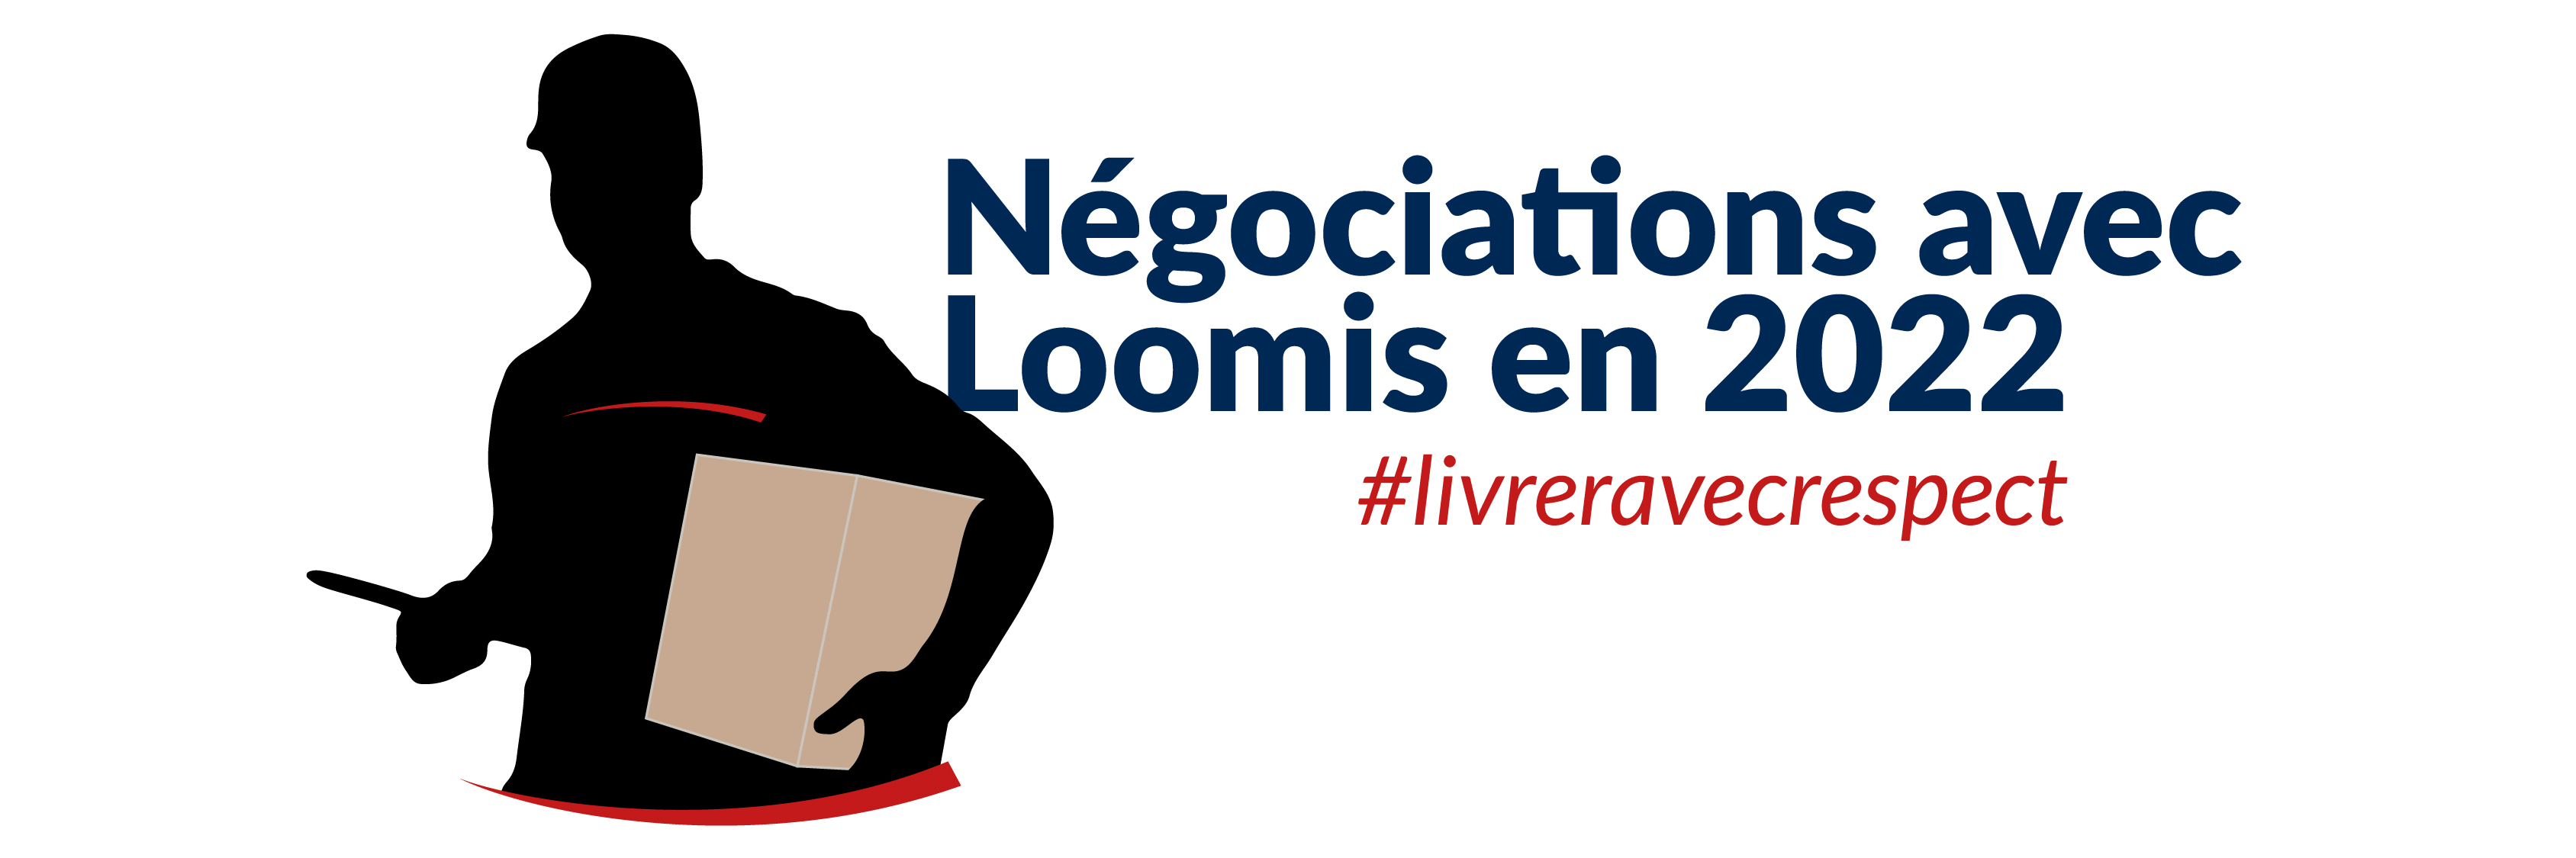 Silhouette figure in holding a brown box beside the words Negotiations avec Loomis en 2022